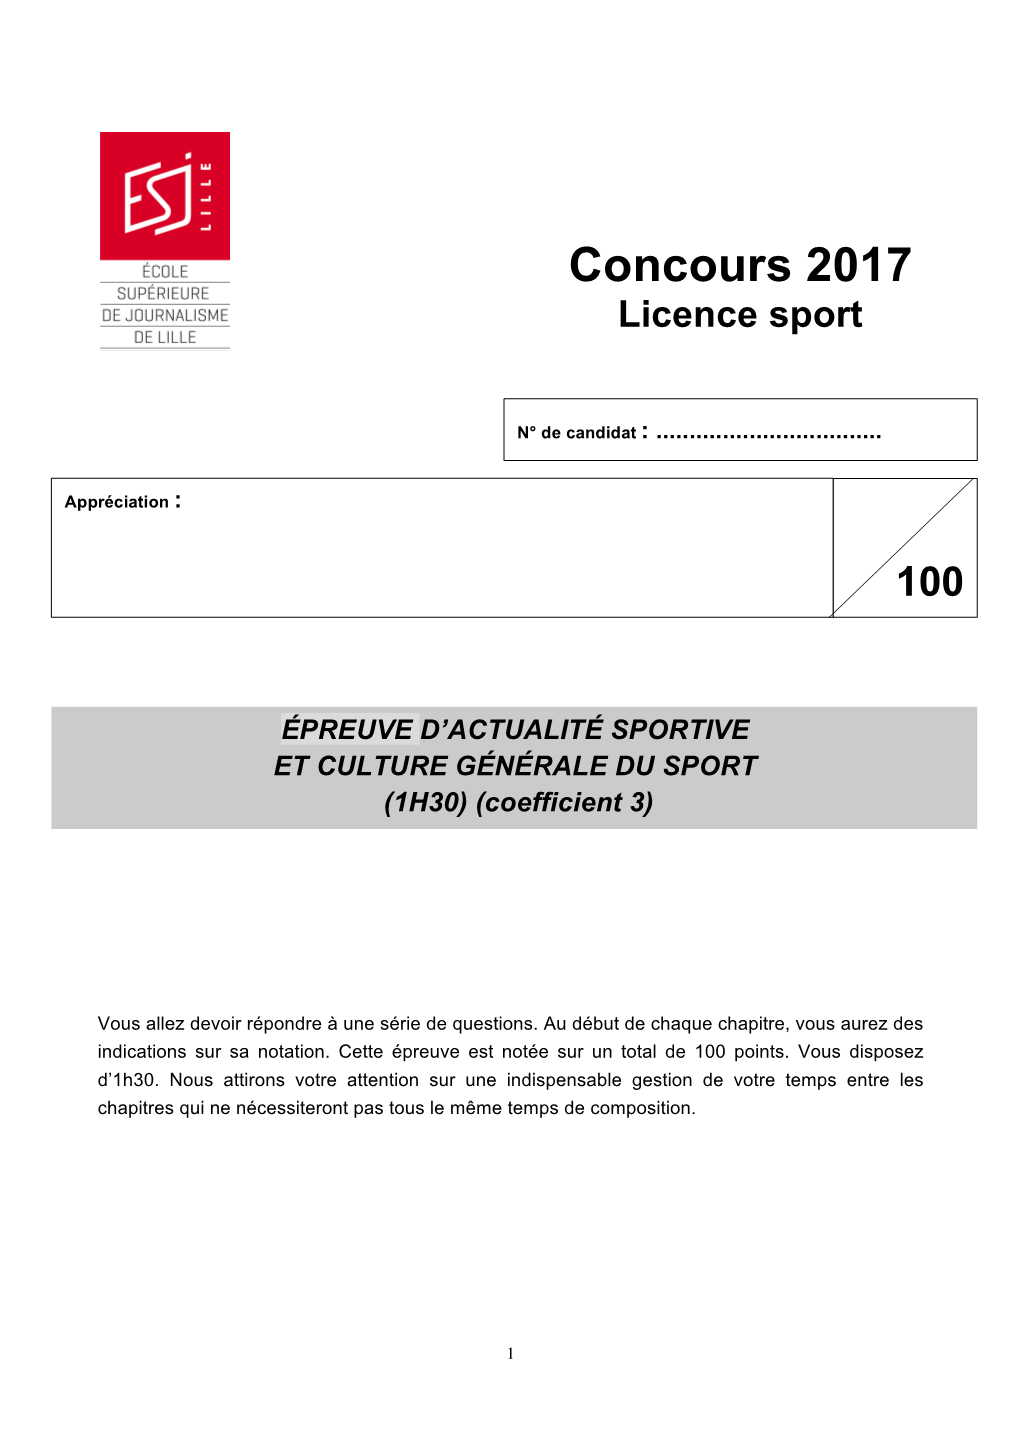 Concours 2017 Licence Sport